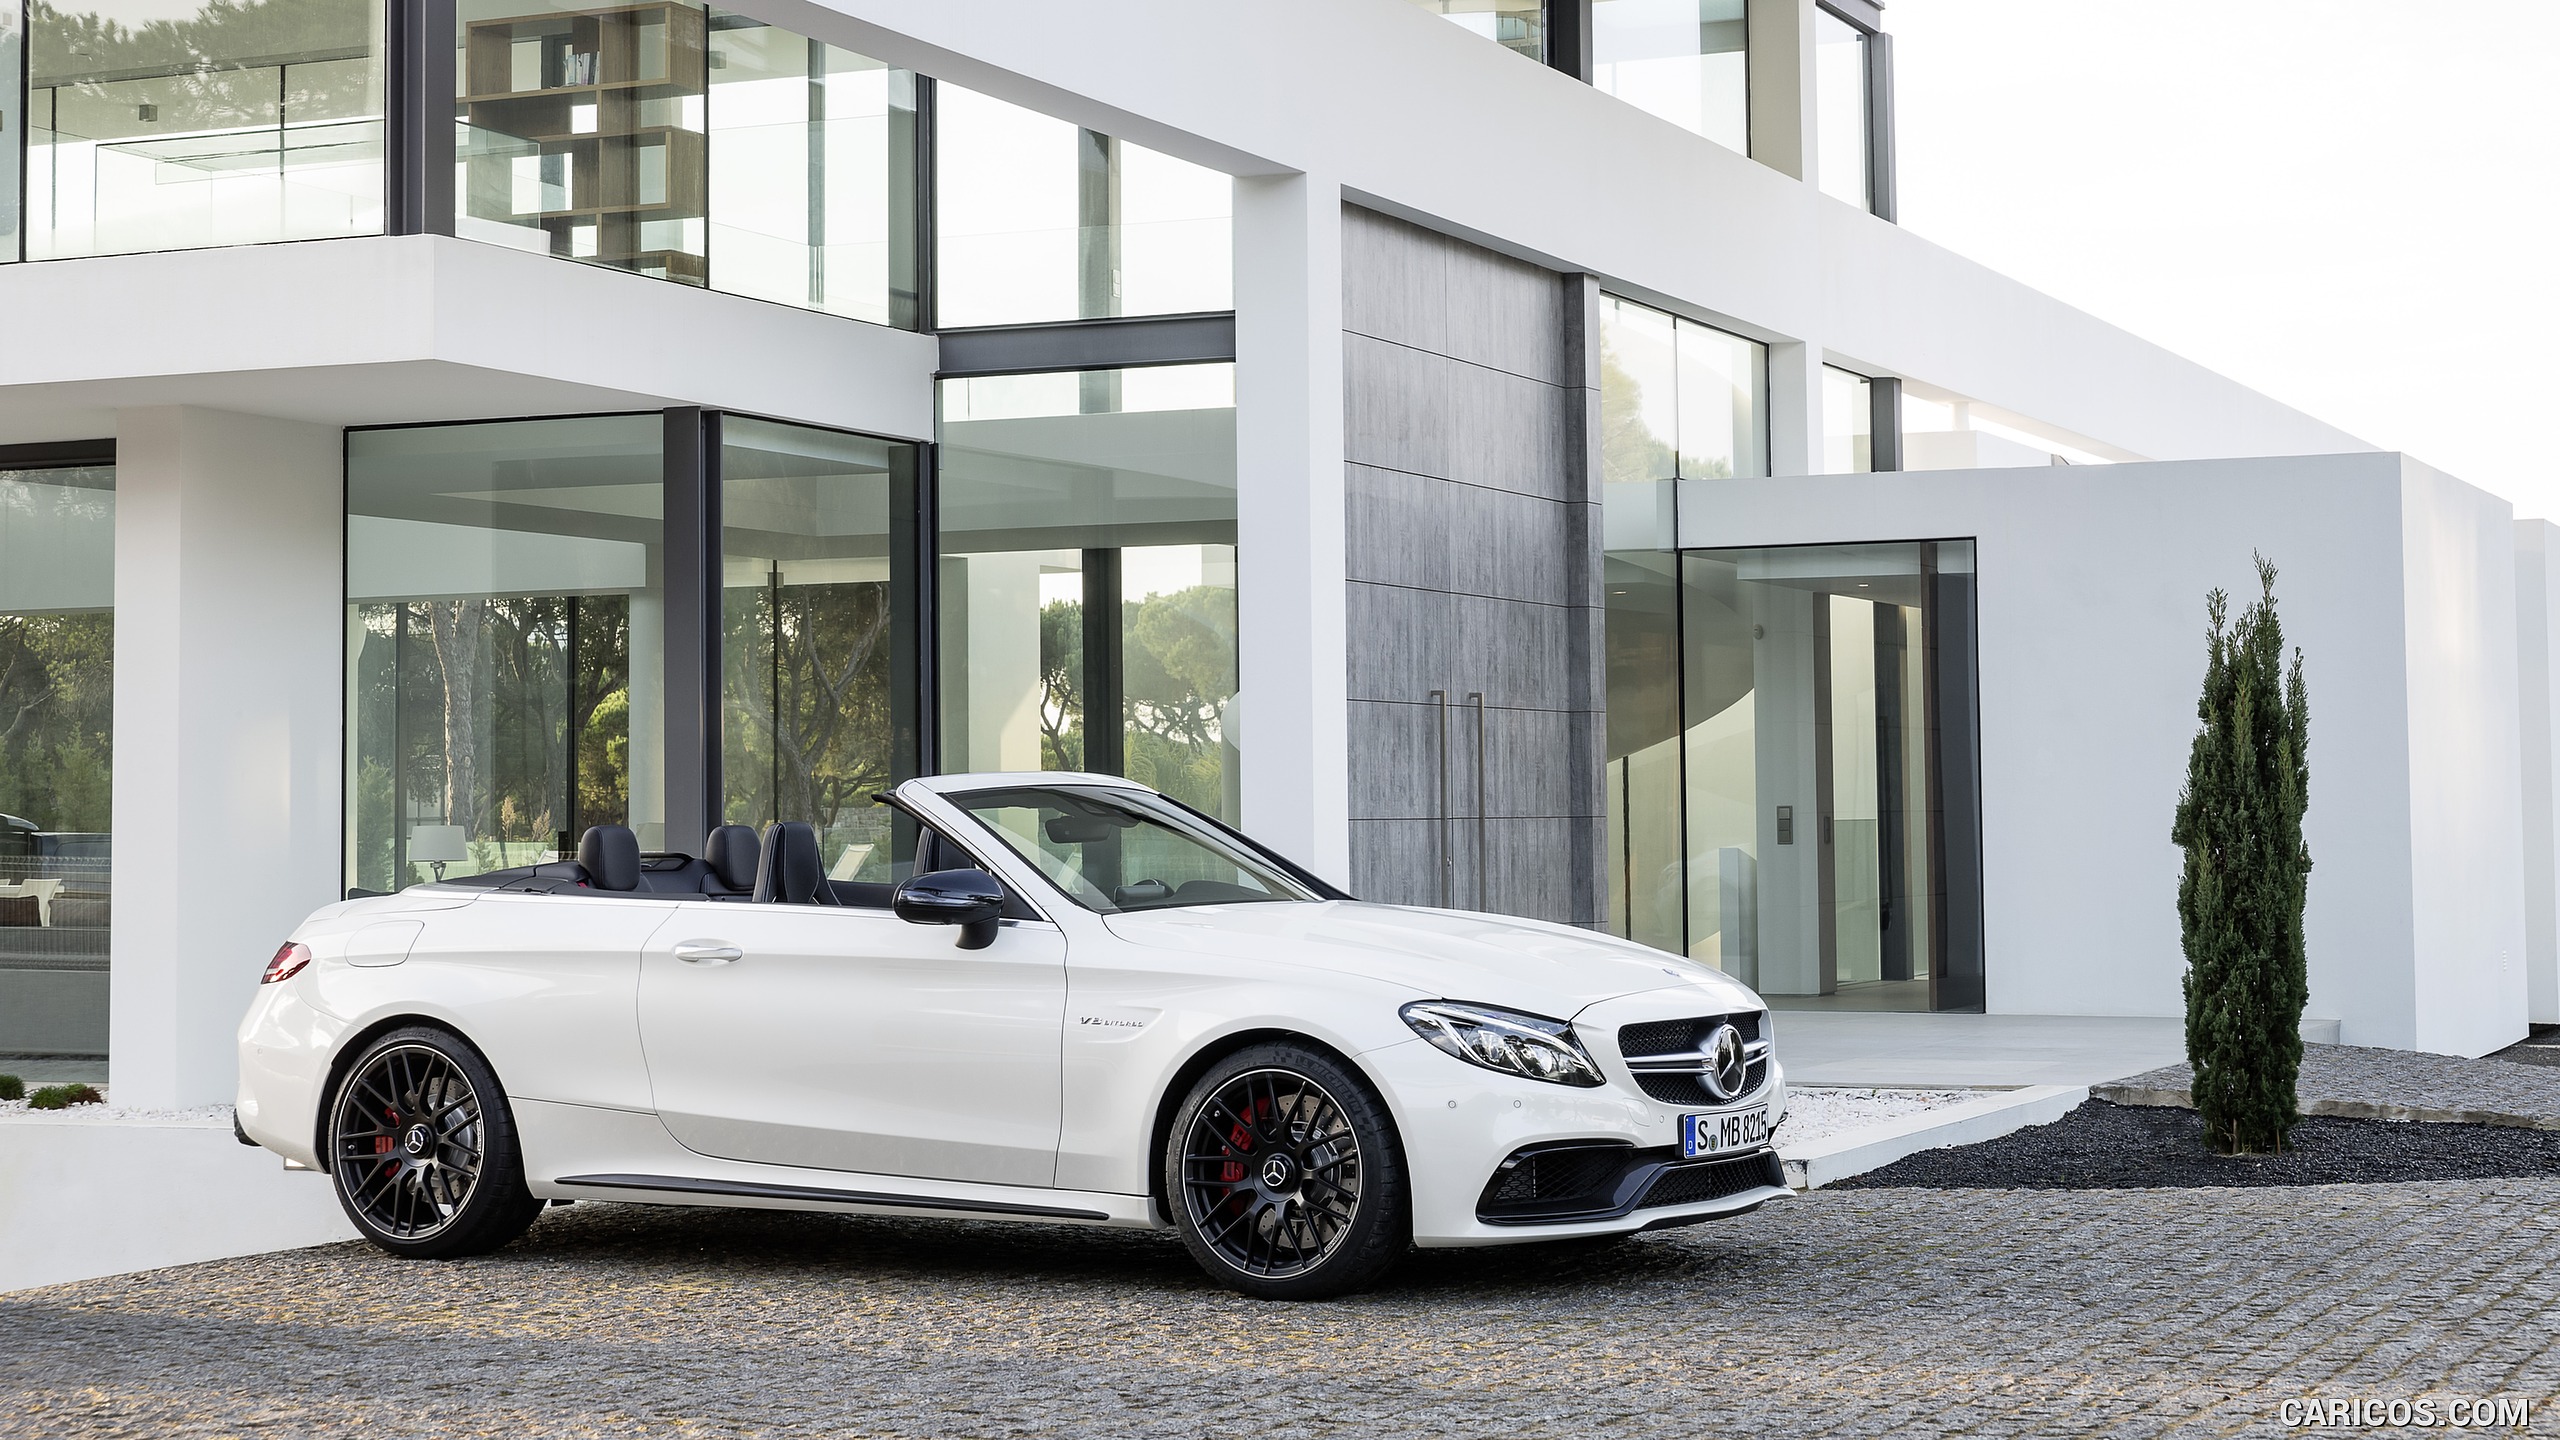 2017 Mercedes-AMG C63 S Cabriolet (Chassis: A205, Color: Designo Diamond White Bright) - Side, #17 of 222